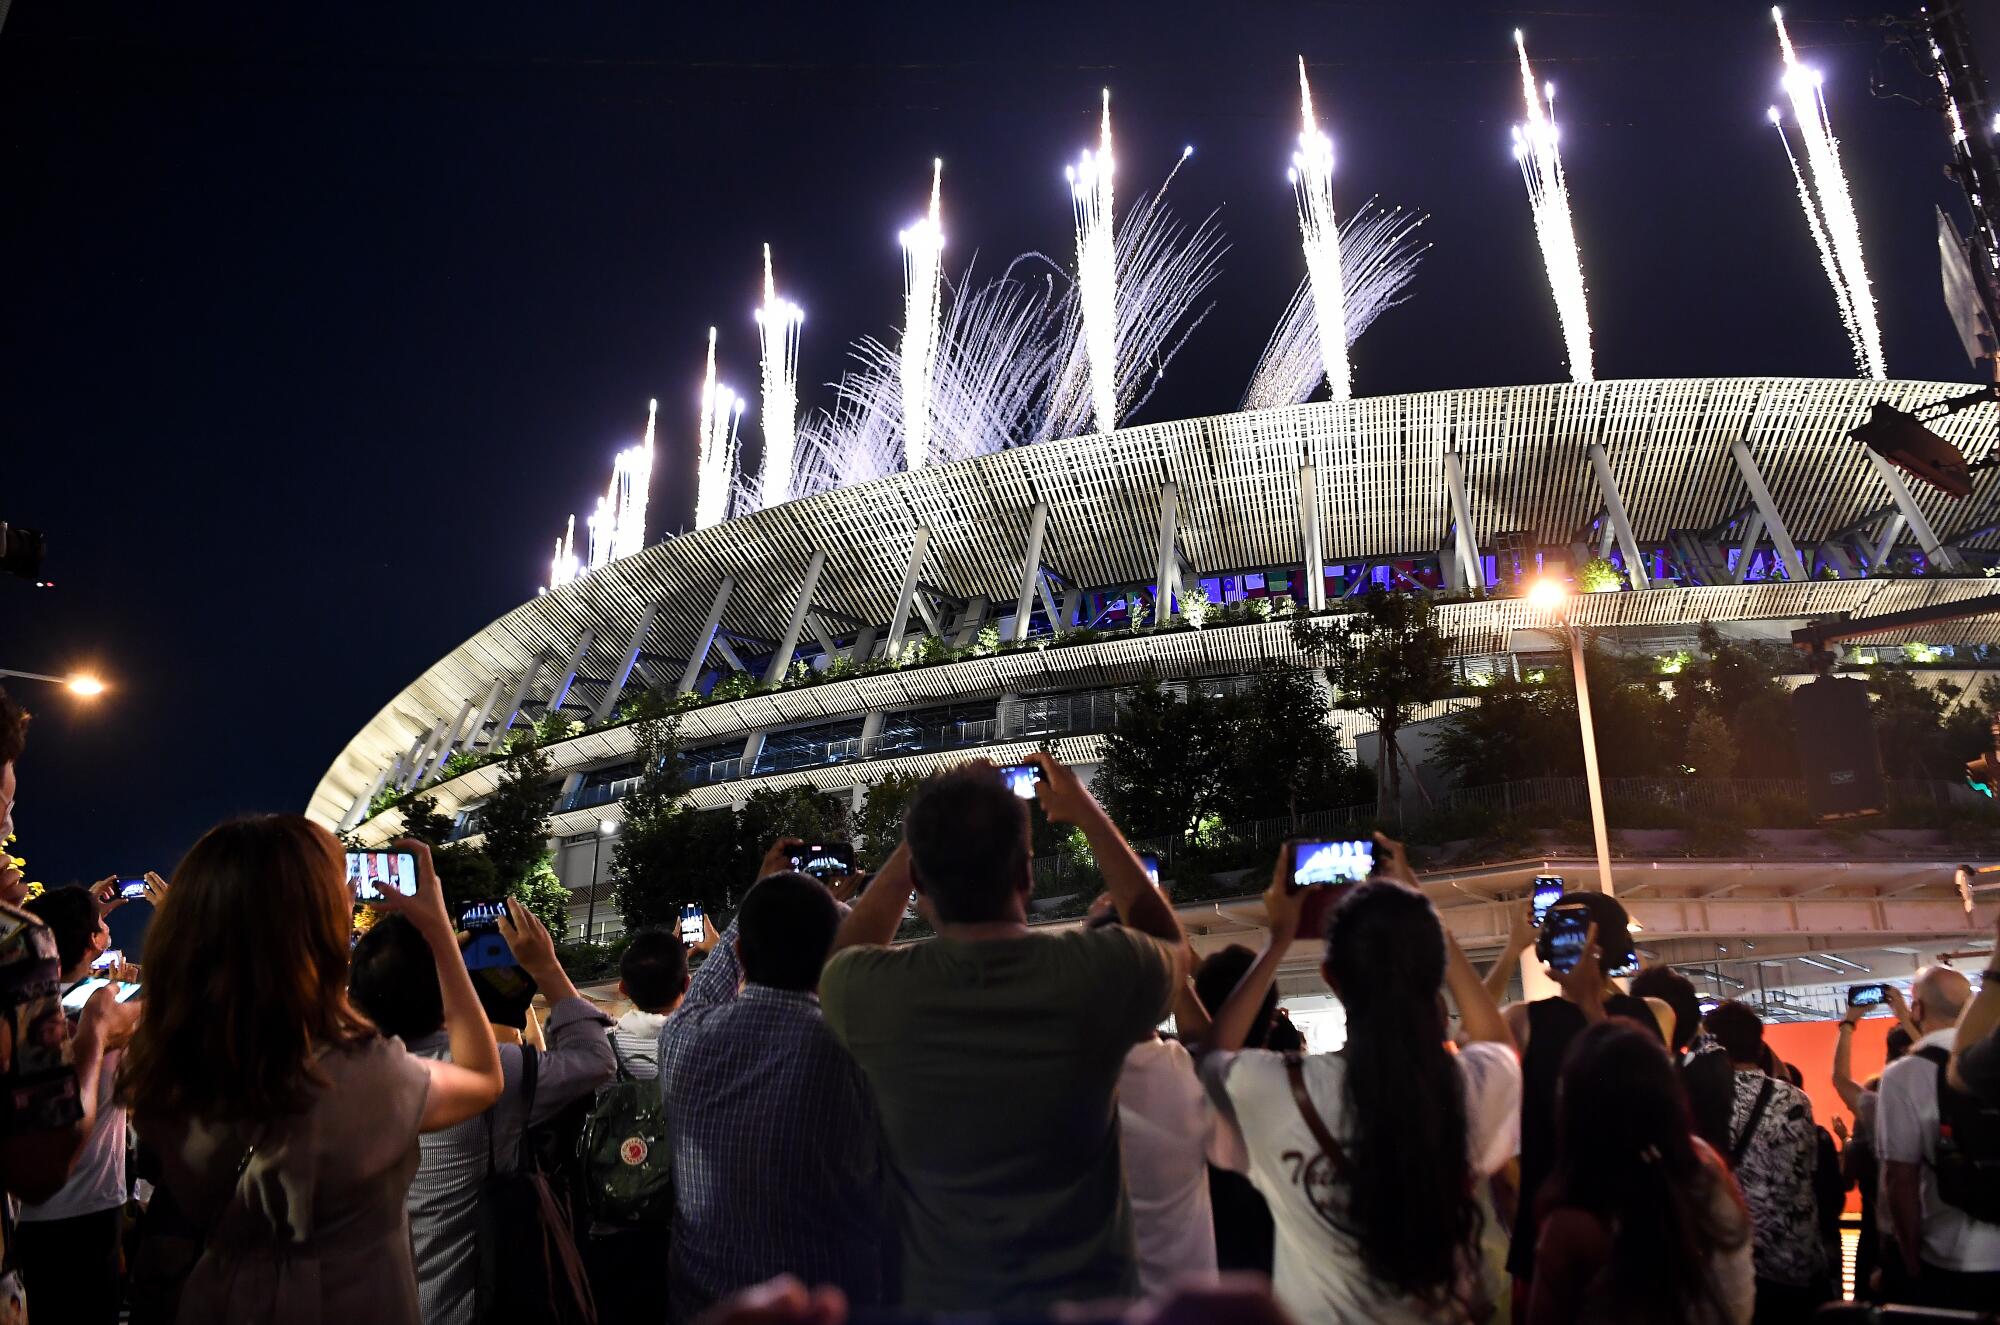  A crowd of people outside a stadium hold up their phones as fireworks explode overhead.